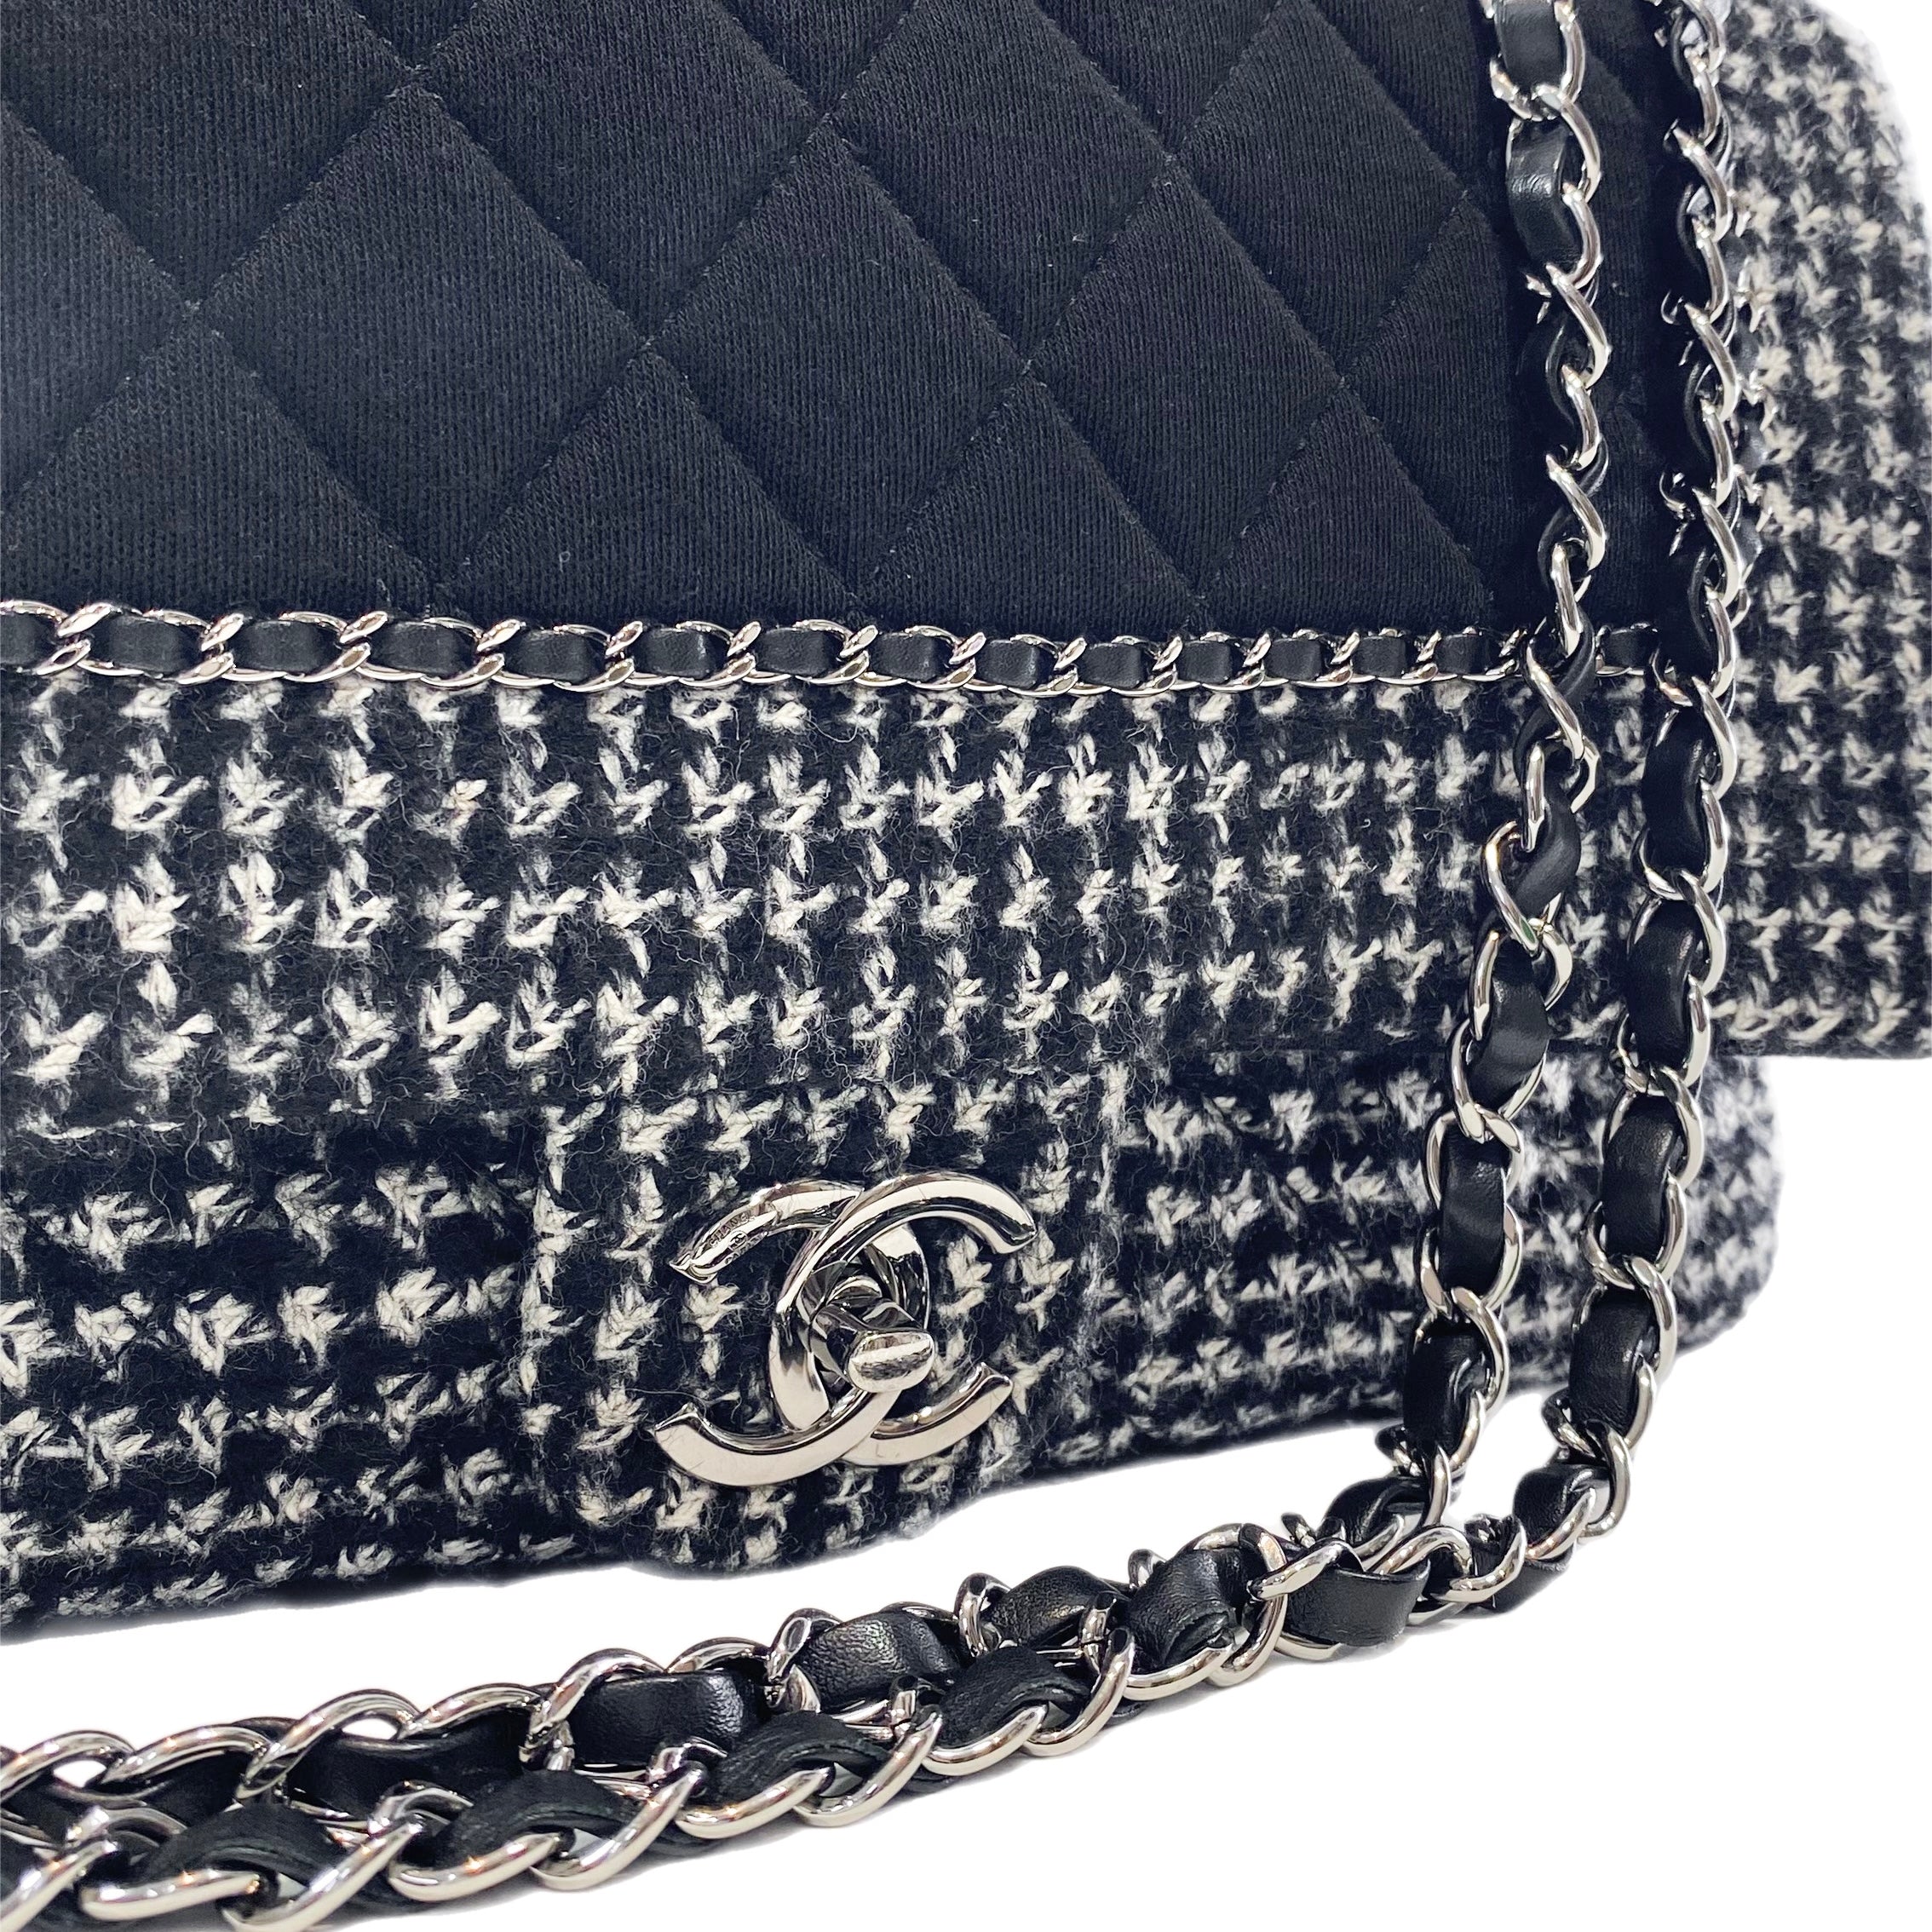 Chanel Black Quilted Lambskin Double Sided Classic Flap Medium